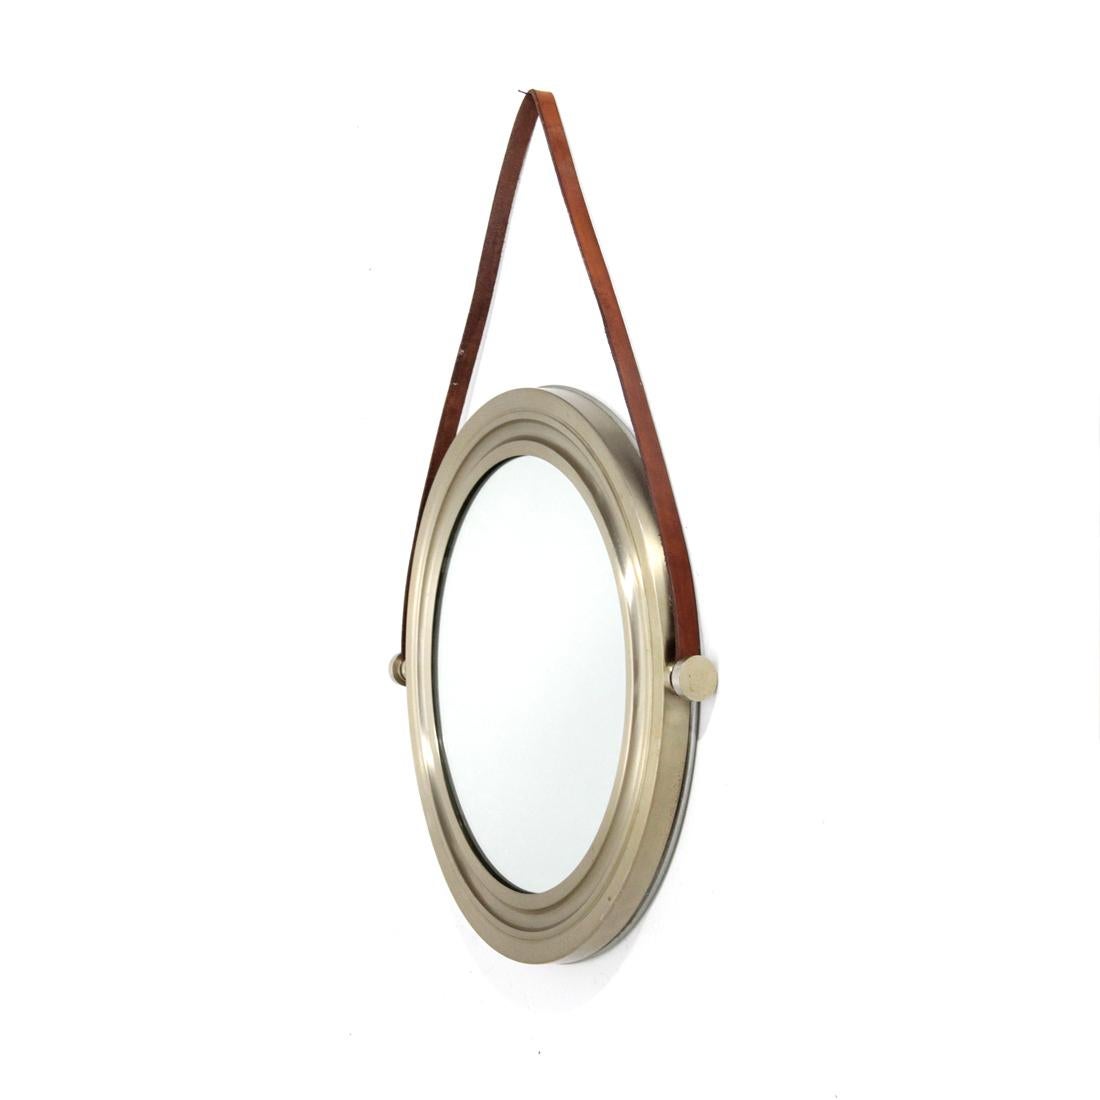 Italian manufacture mirror produced in the 1960s.
Brushed nickel-plated brass structure.
Mirrored surface in mirrored glass.
Leather lace.
Good general conditions, some signs due to normal use over time.

Dimensions: Diameter 43 cm, height 65